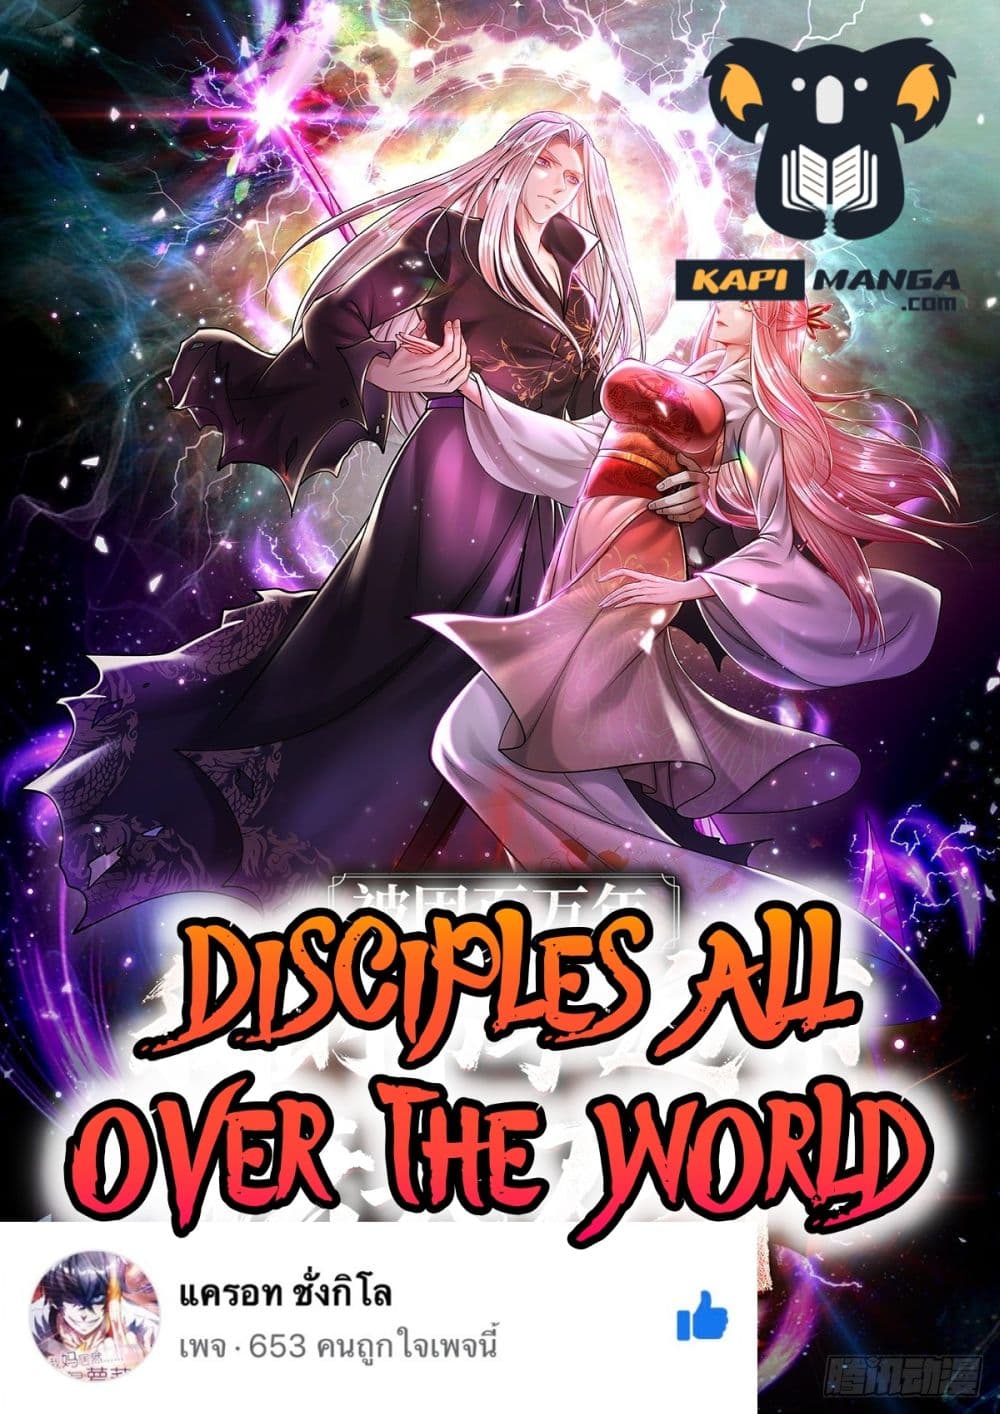 Disciples All Over the World à¸à¸­à¸à¸à¸µà¹ 69 (1)